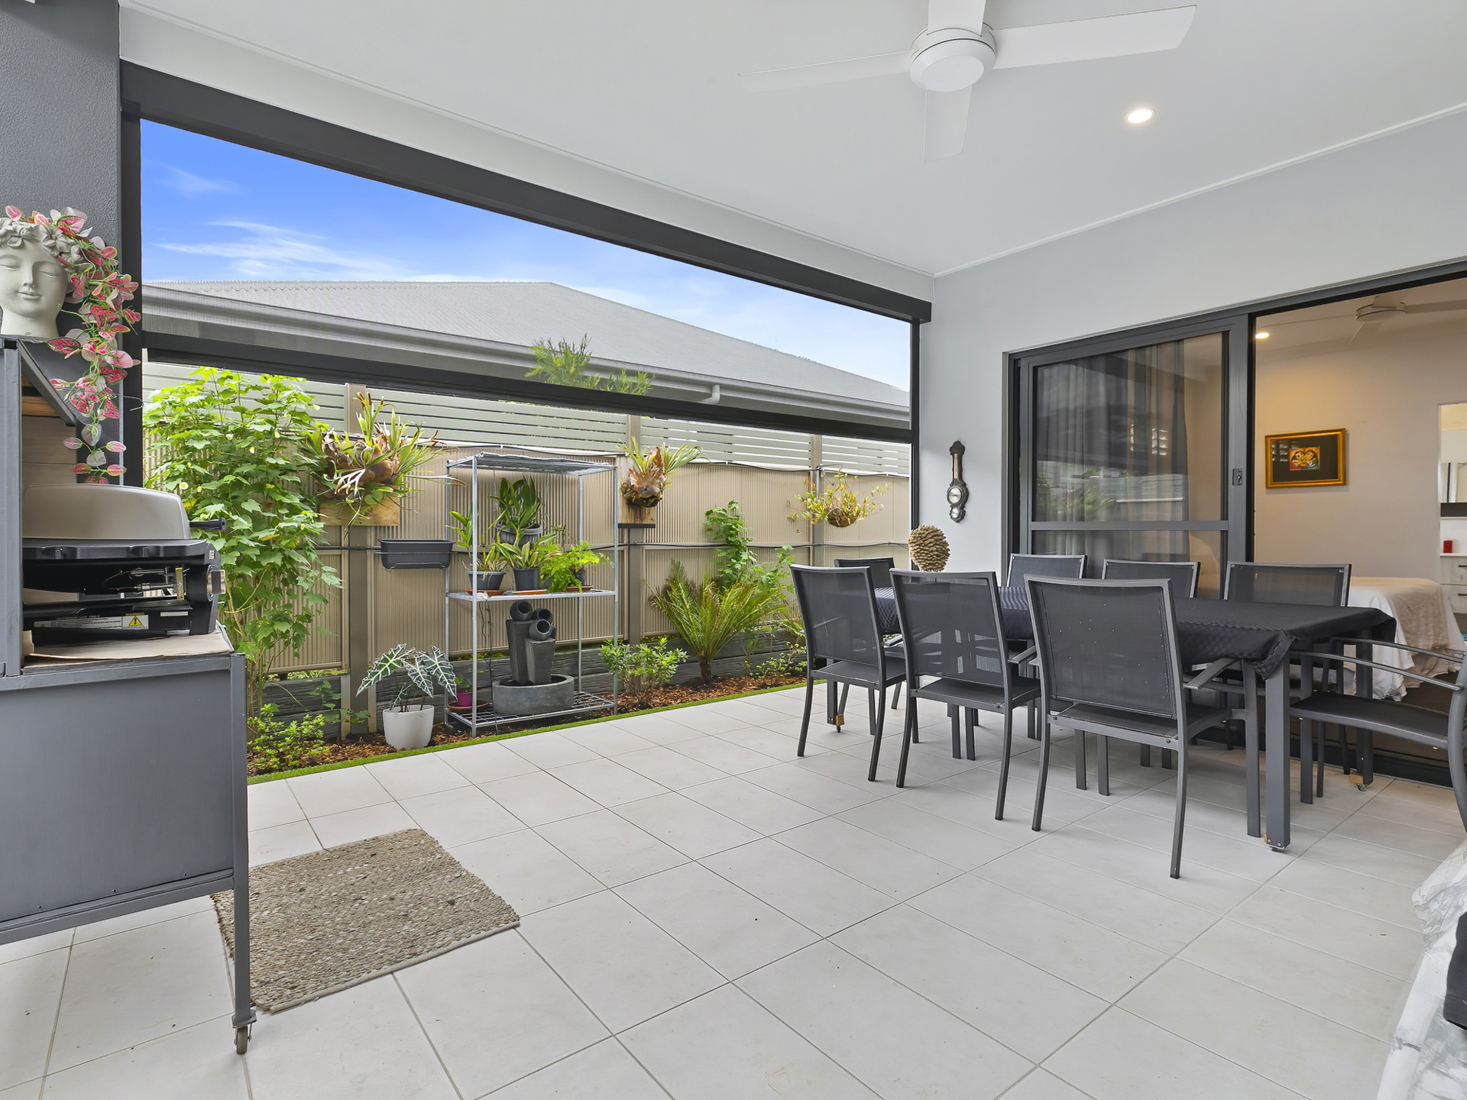 outdoor covered patio with light tiles, white roofline, grey dining setting and barbeque.